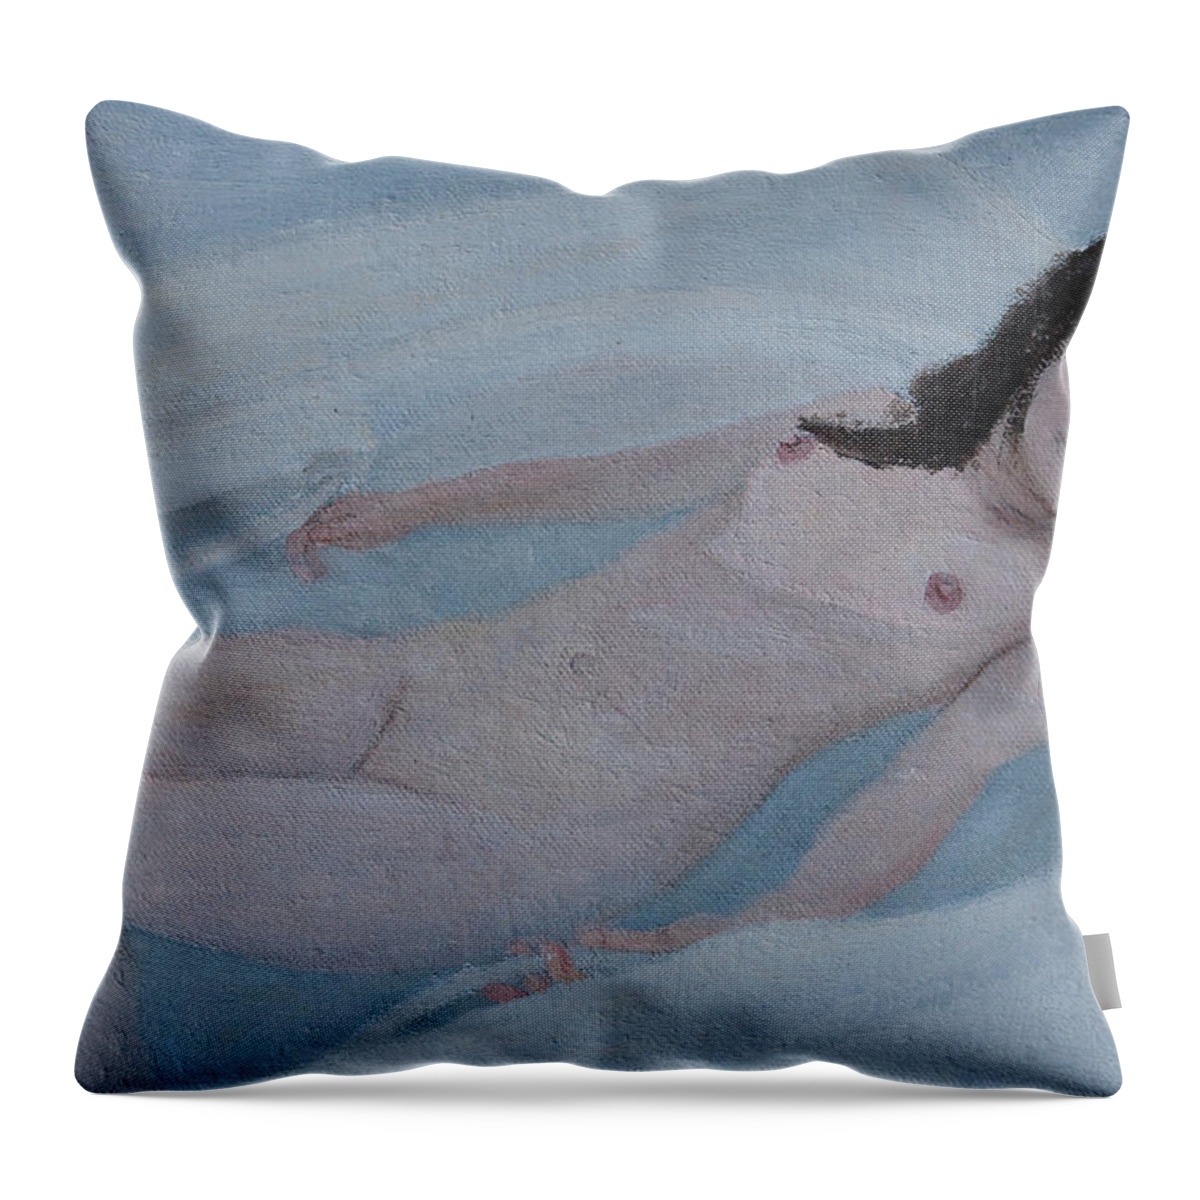 Nude Throw Pillow featuring the painting Bath Time by Masami IIDA